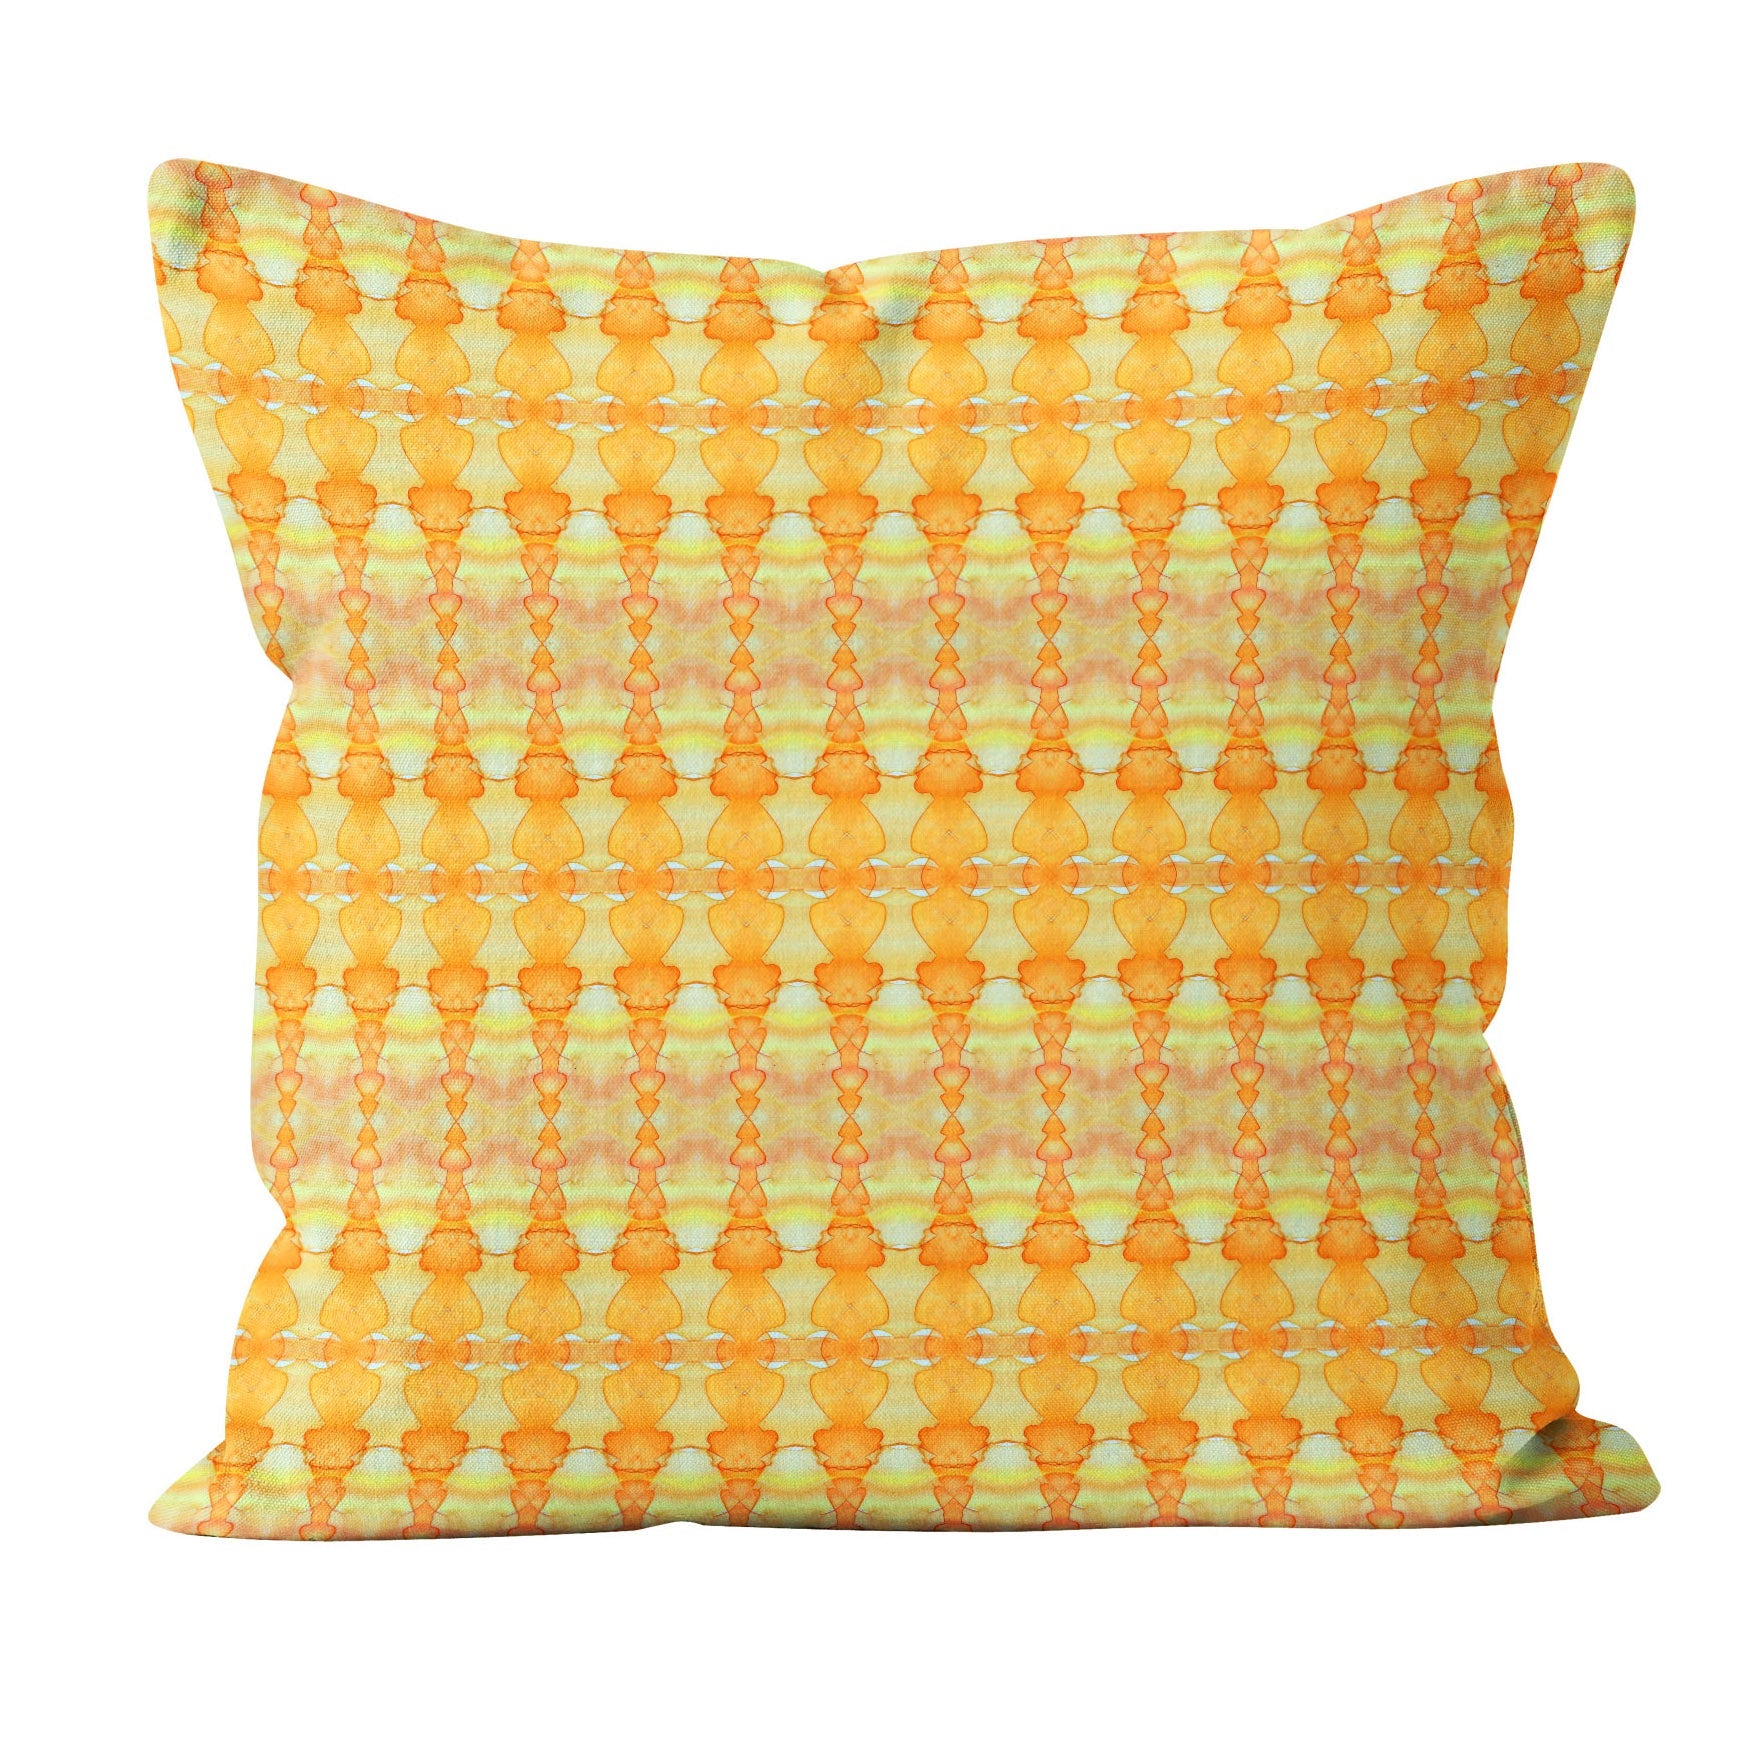 Square throw pillow featuring hand-painted pattern in yellow and orange